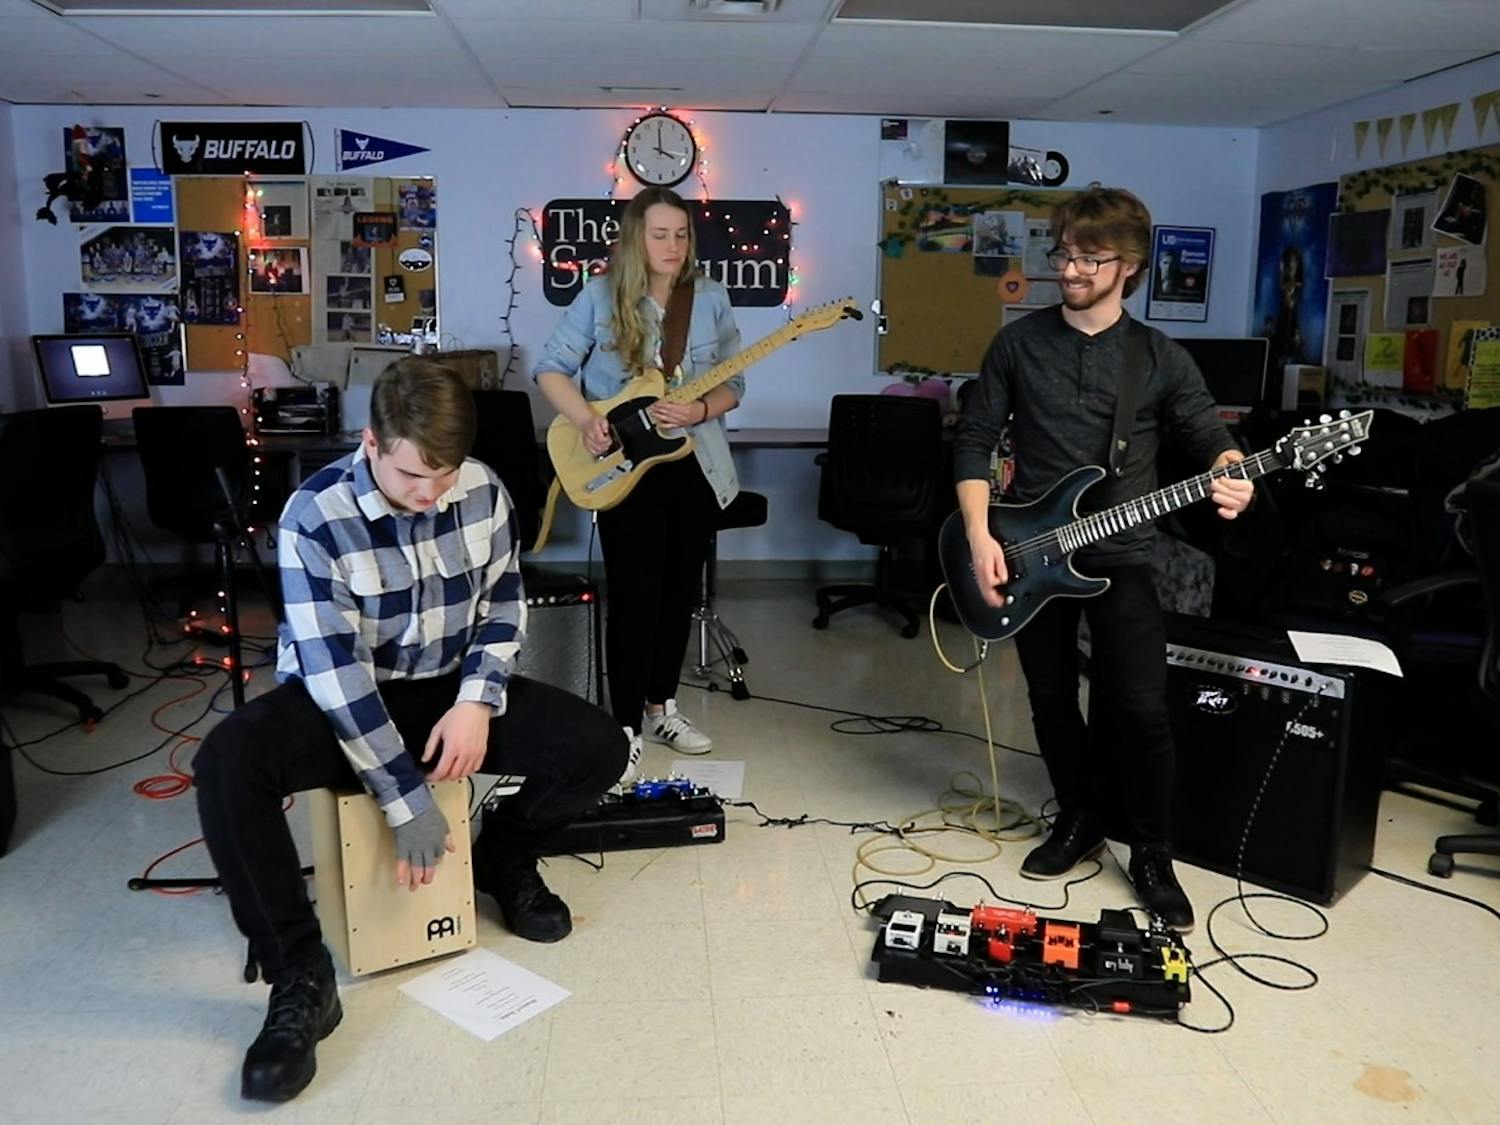 The three-piece rock group, fronted by UB electrical engineering senior Joseph Gogan (left) with guitarists Katie Missert (middle) and Matthew Riley (right), played a raucous set that featured both original songs and a host of classic covers.